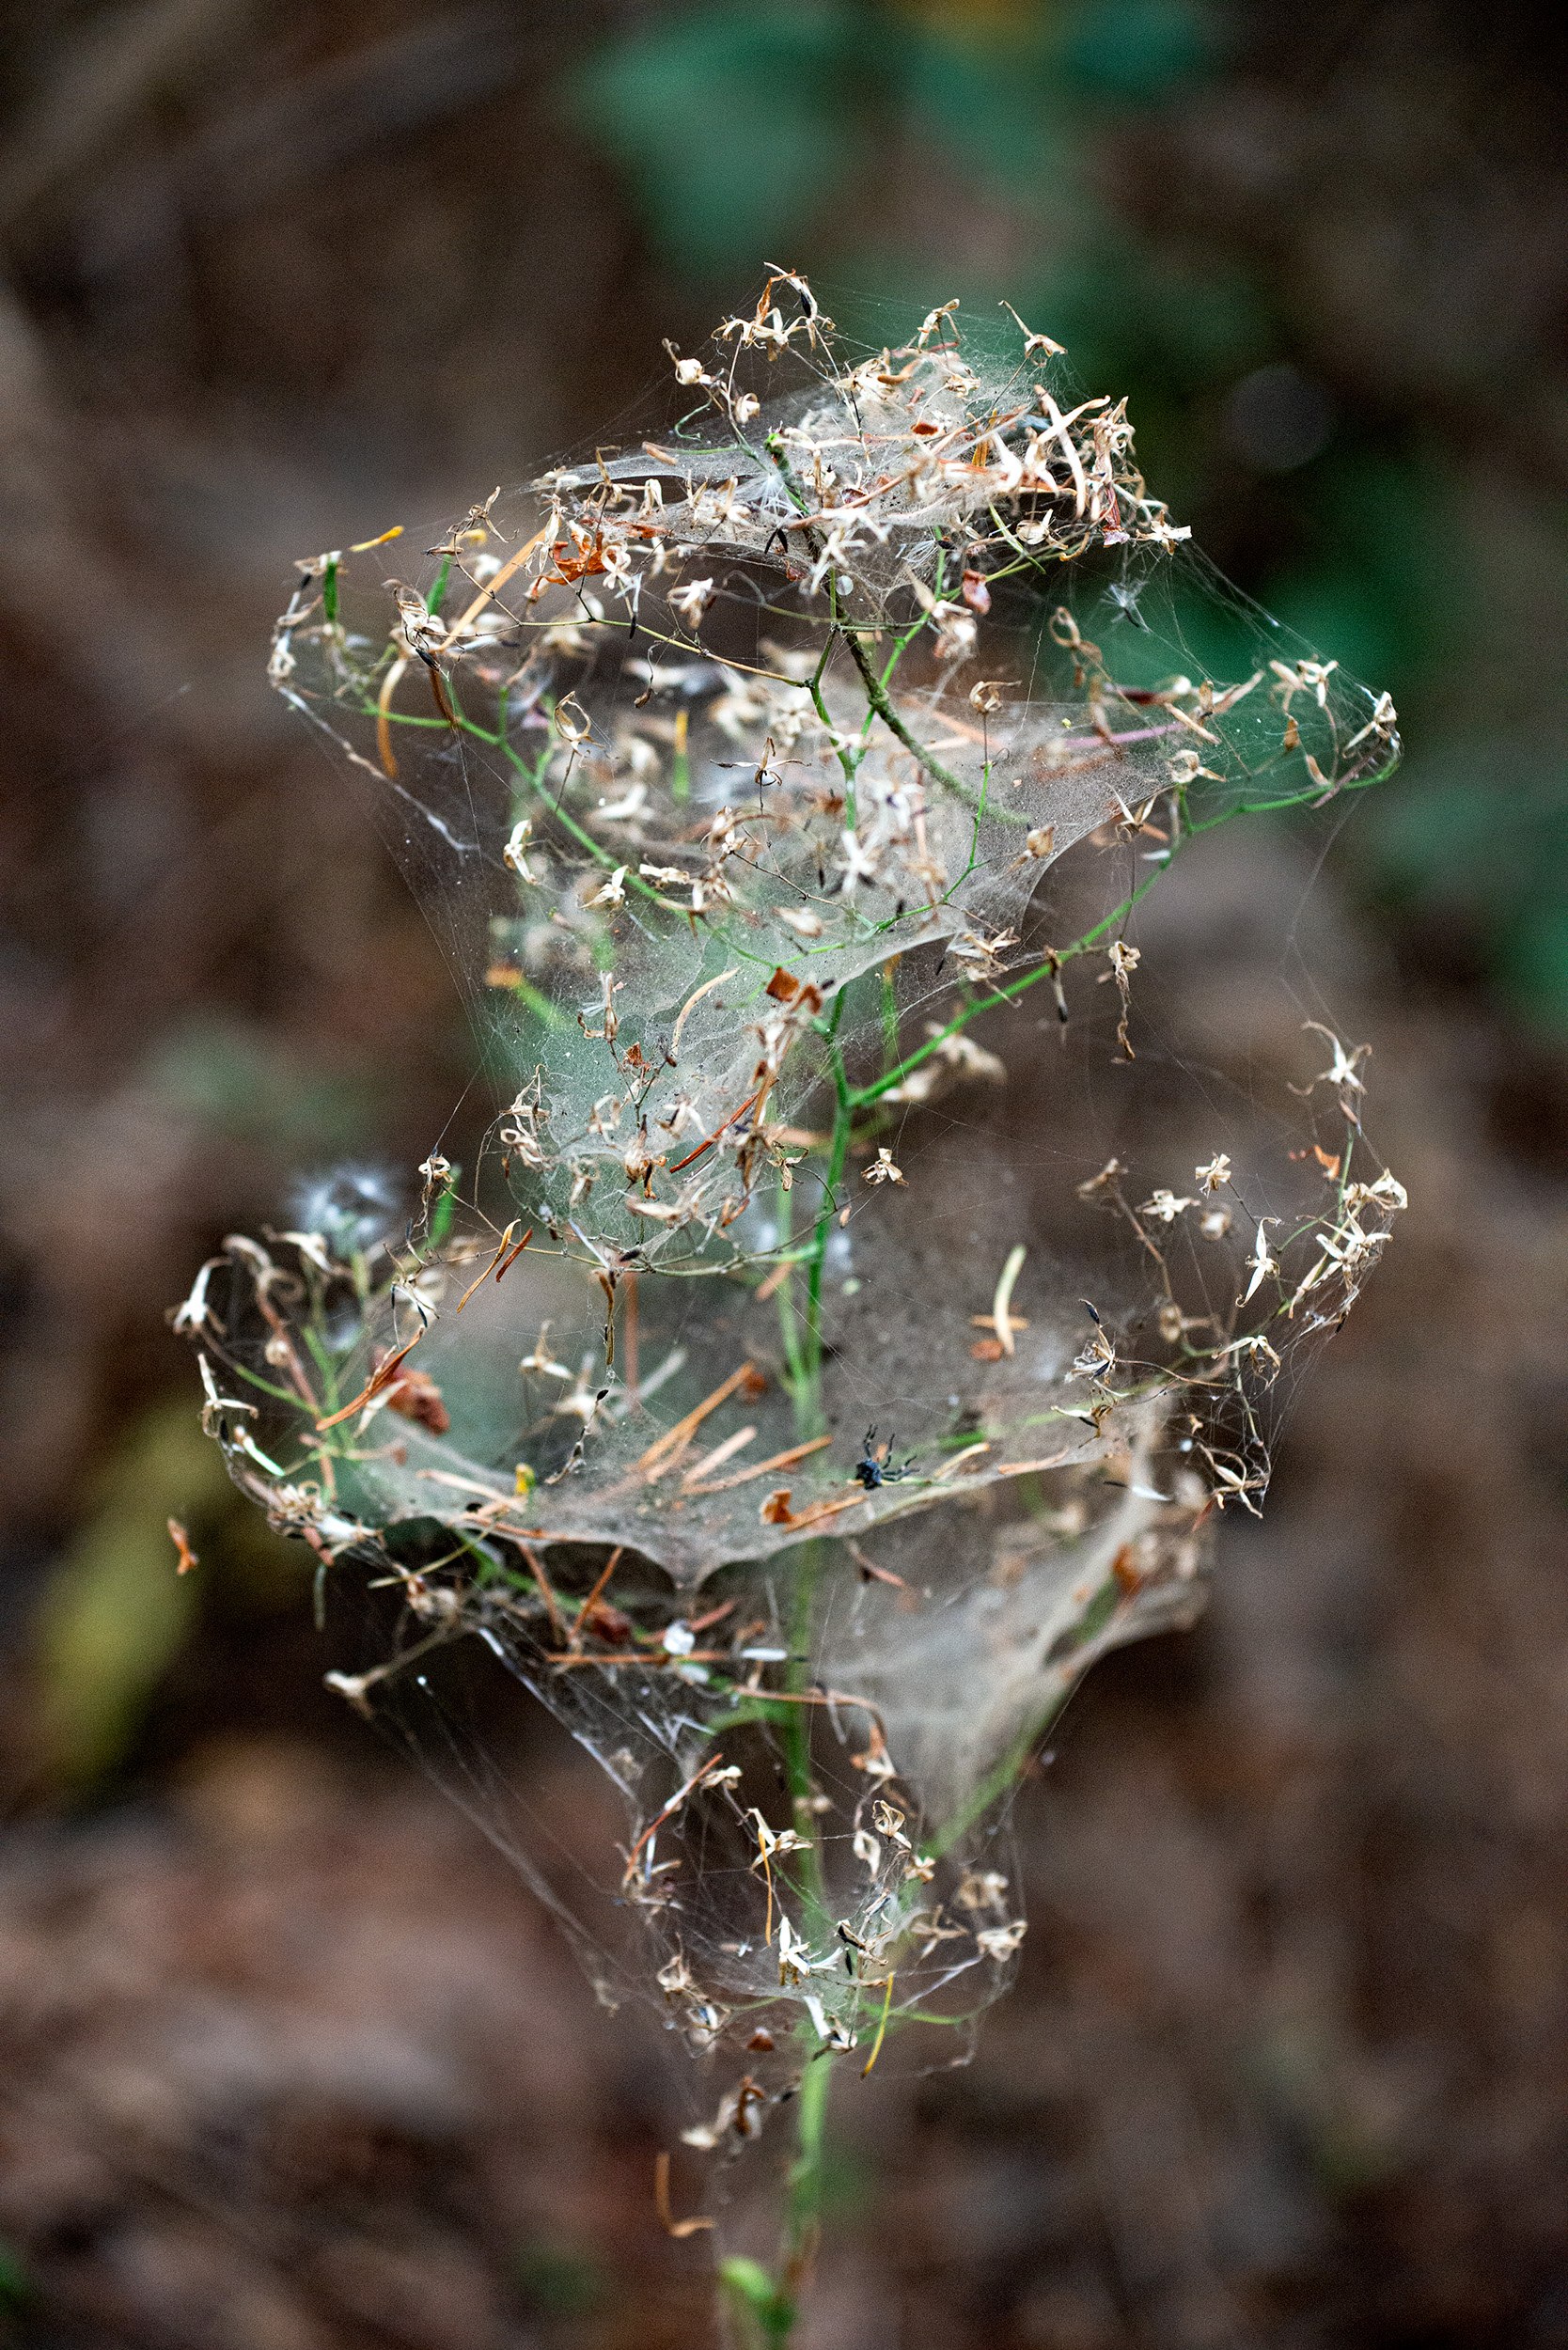 Plant Wrapped in Spider Web, Discovery Park, Seattle, Washington